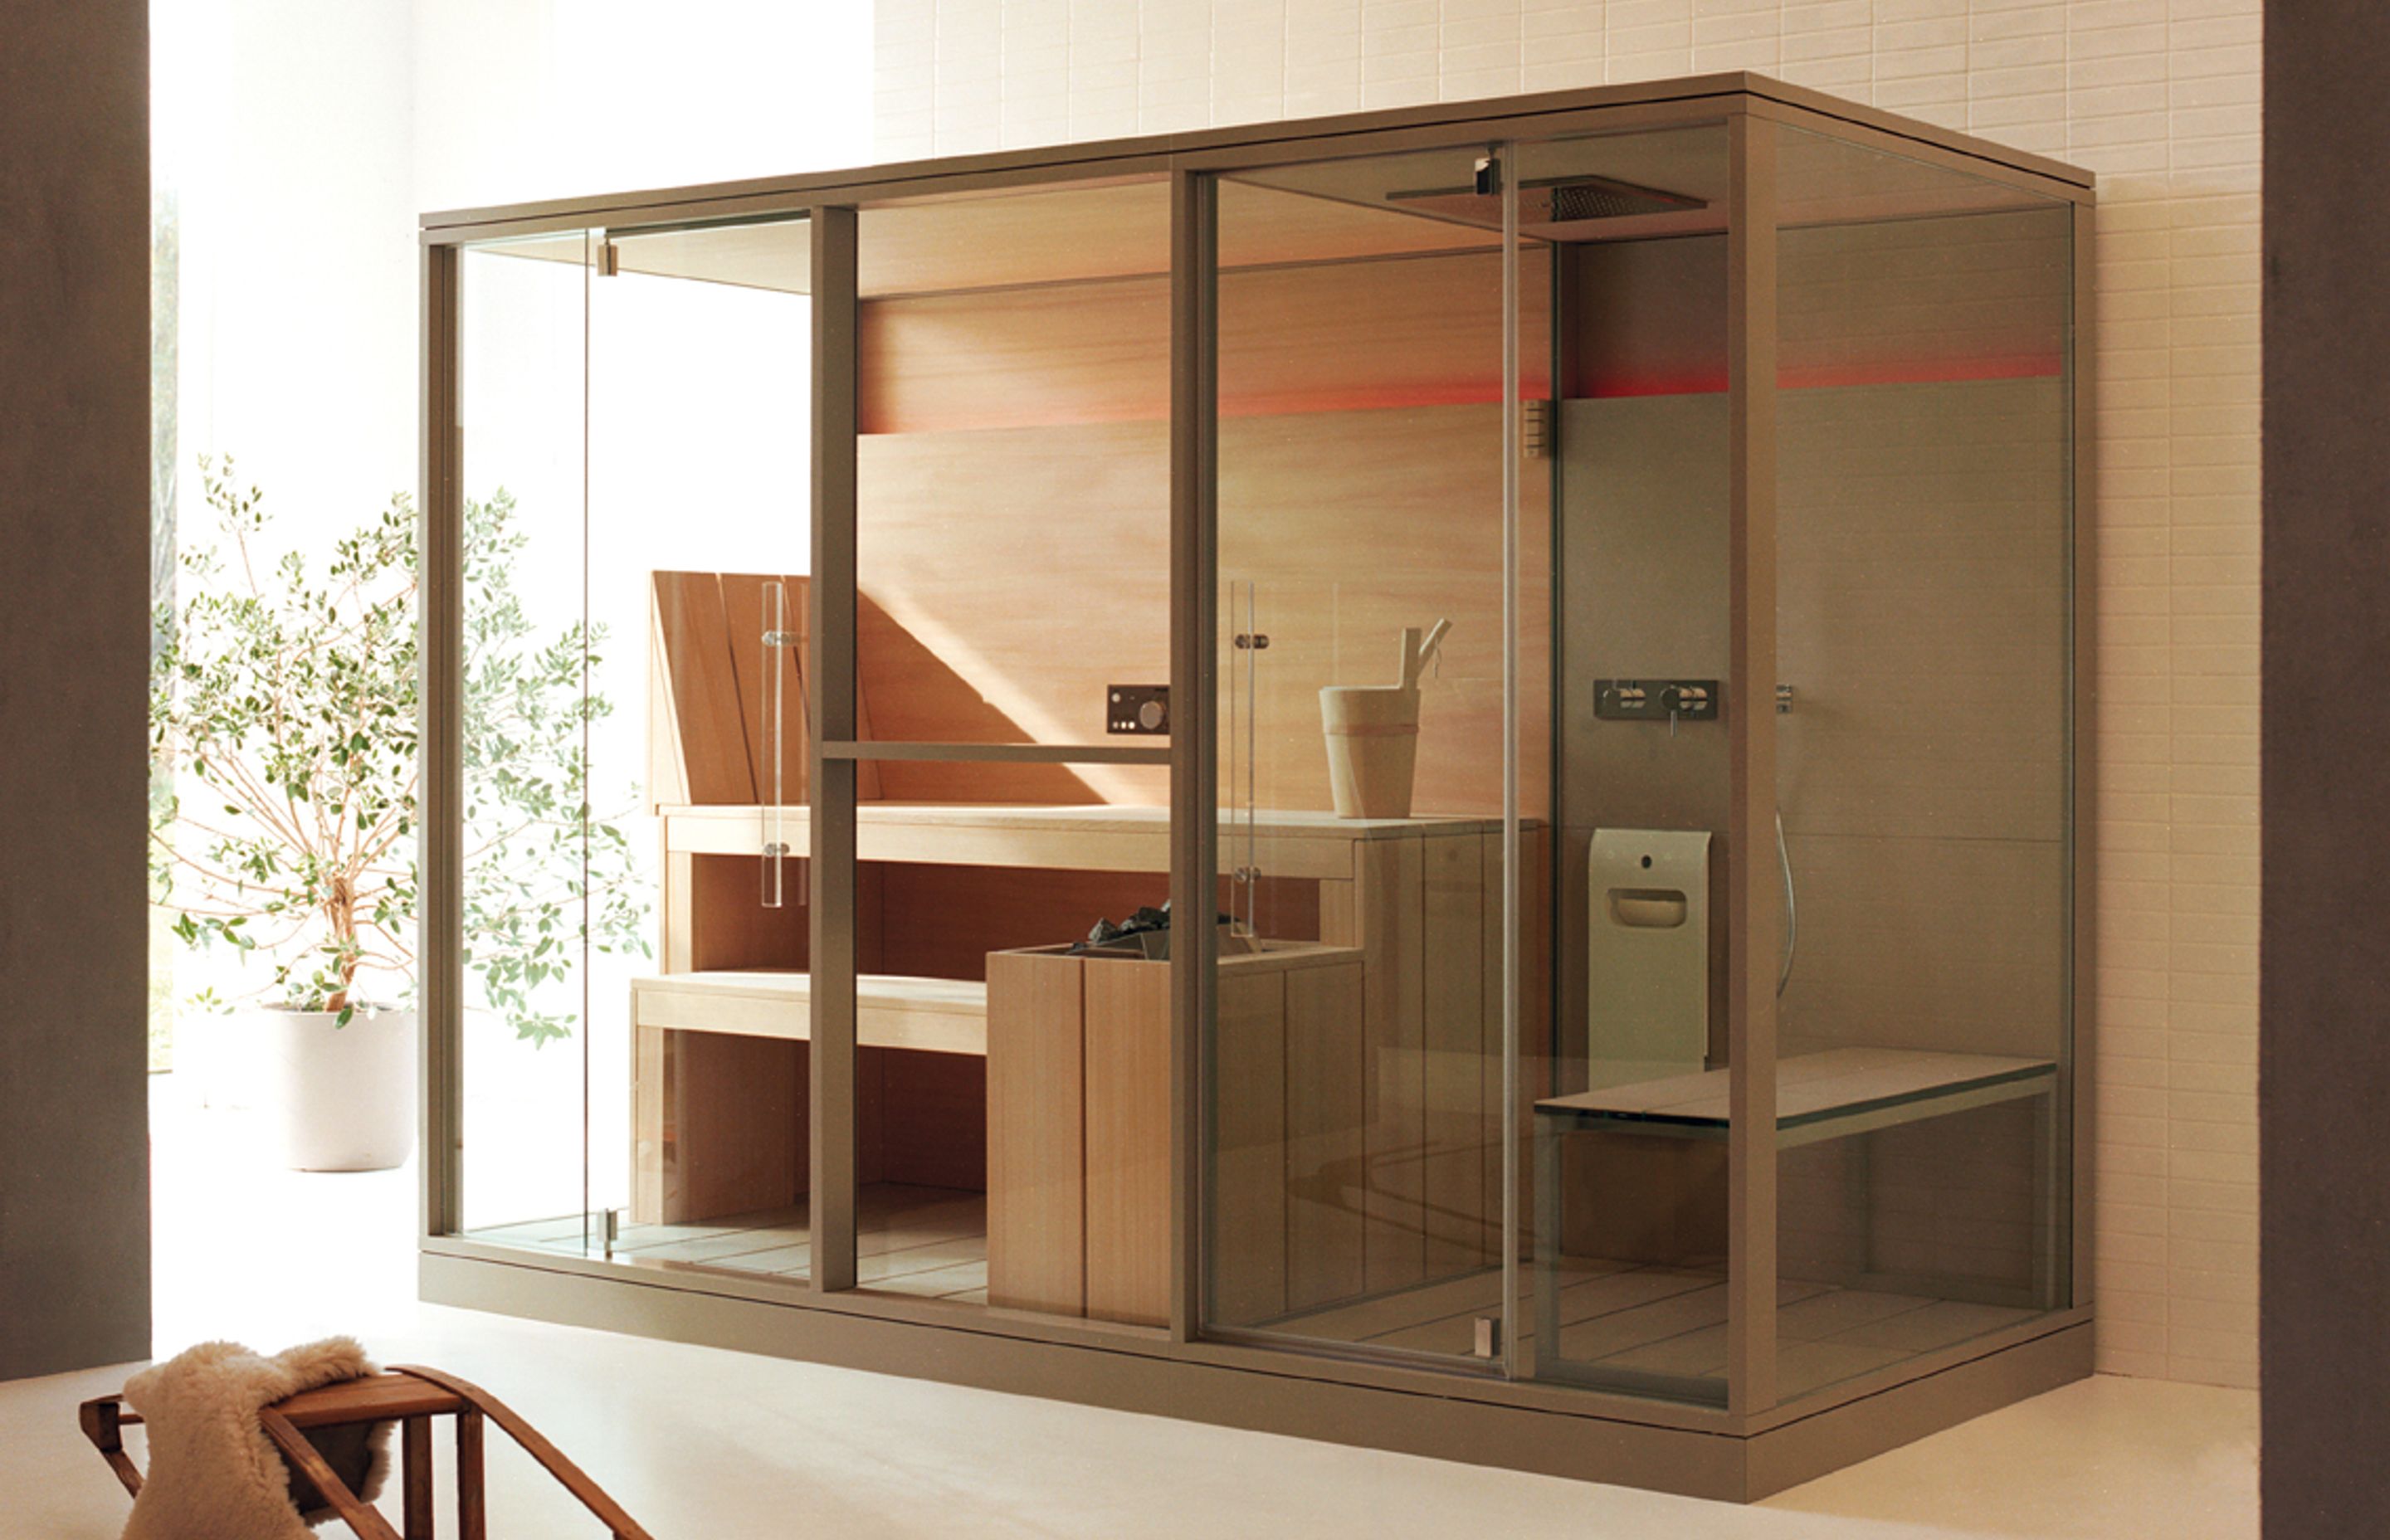 The Mid Sauna and Hammam Steam Shower System from Effe is a complete system offering the best of both worlds in one space-saving design.